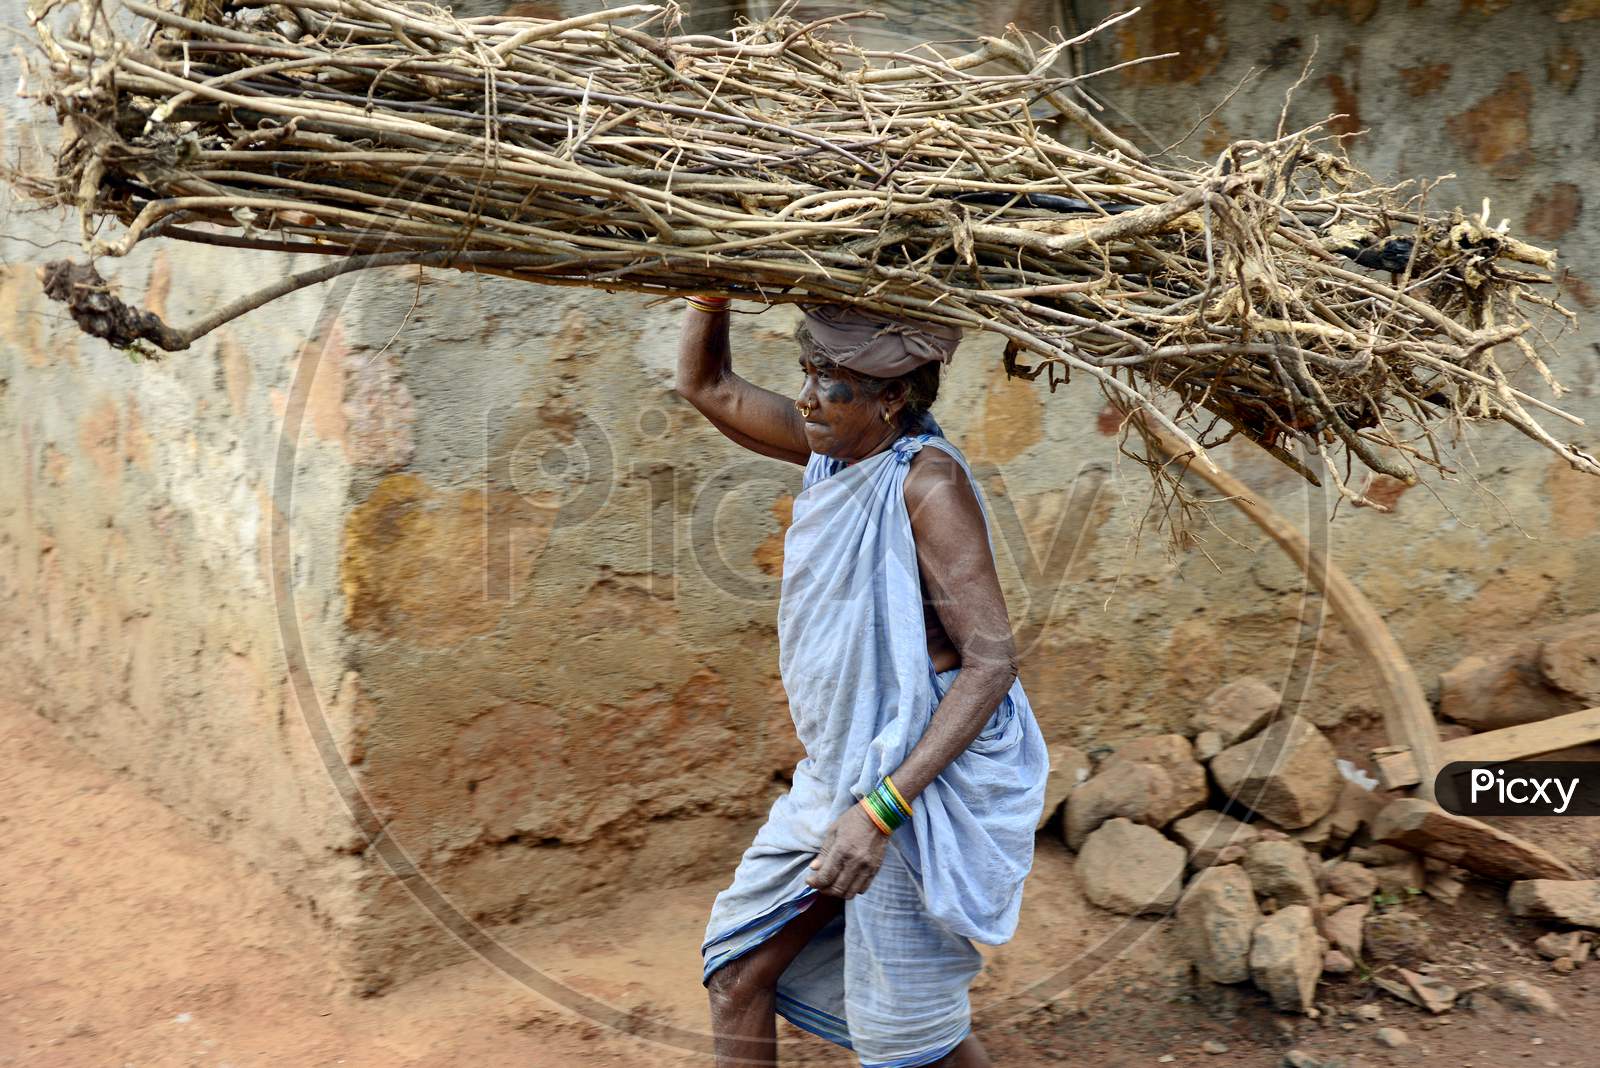 Indian Tribal Woman carrying pile of sticks on her head